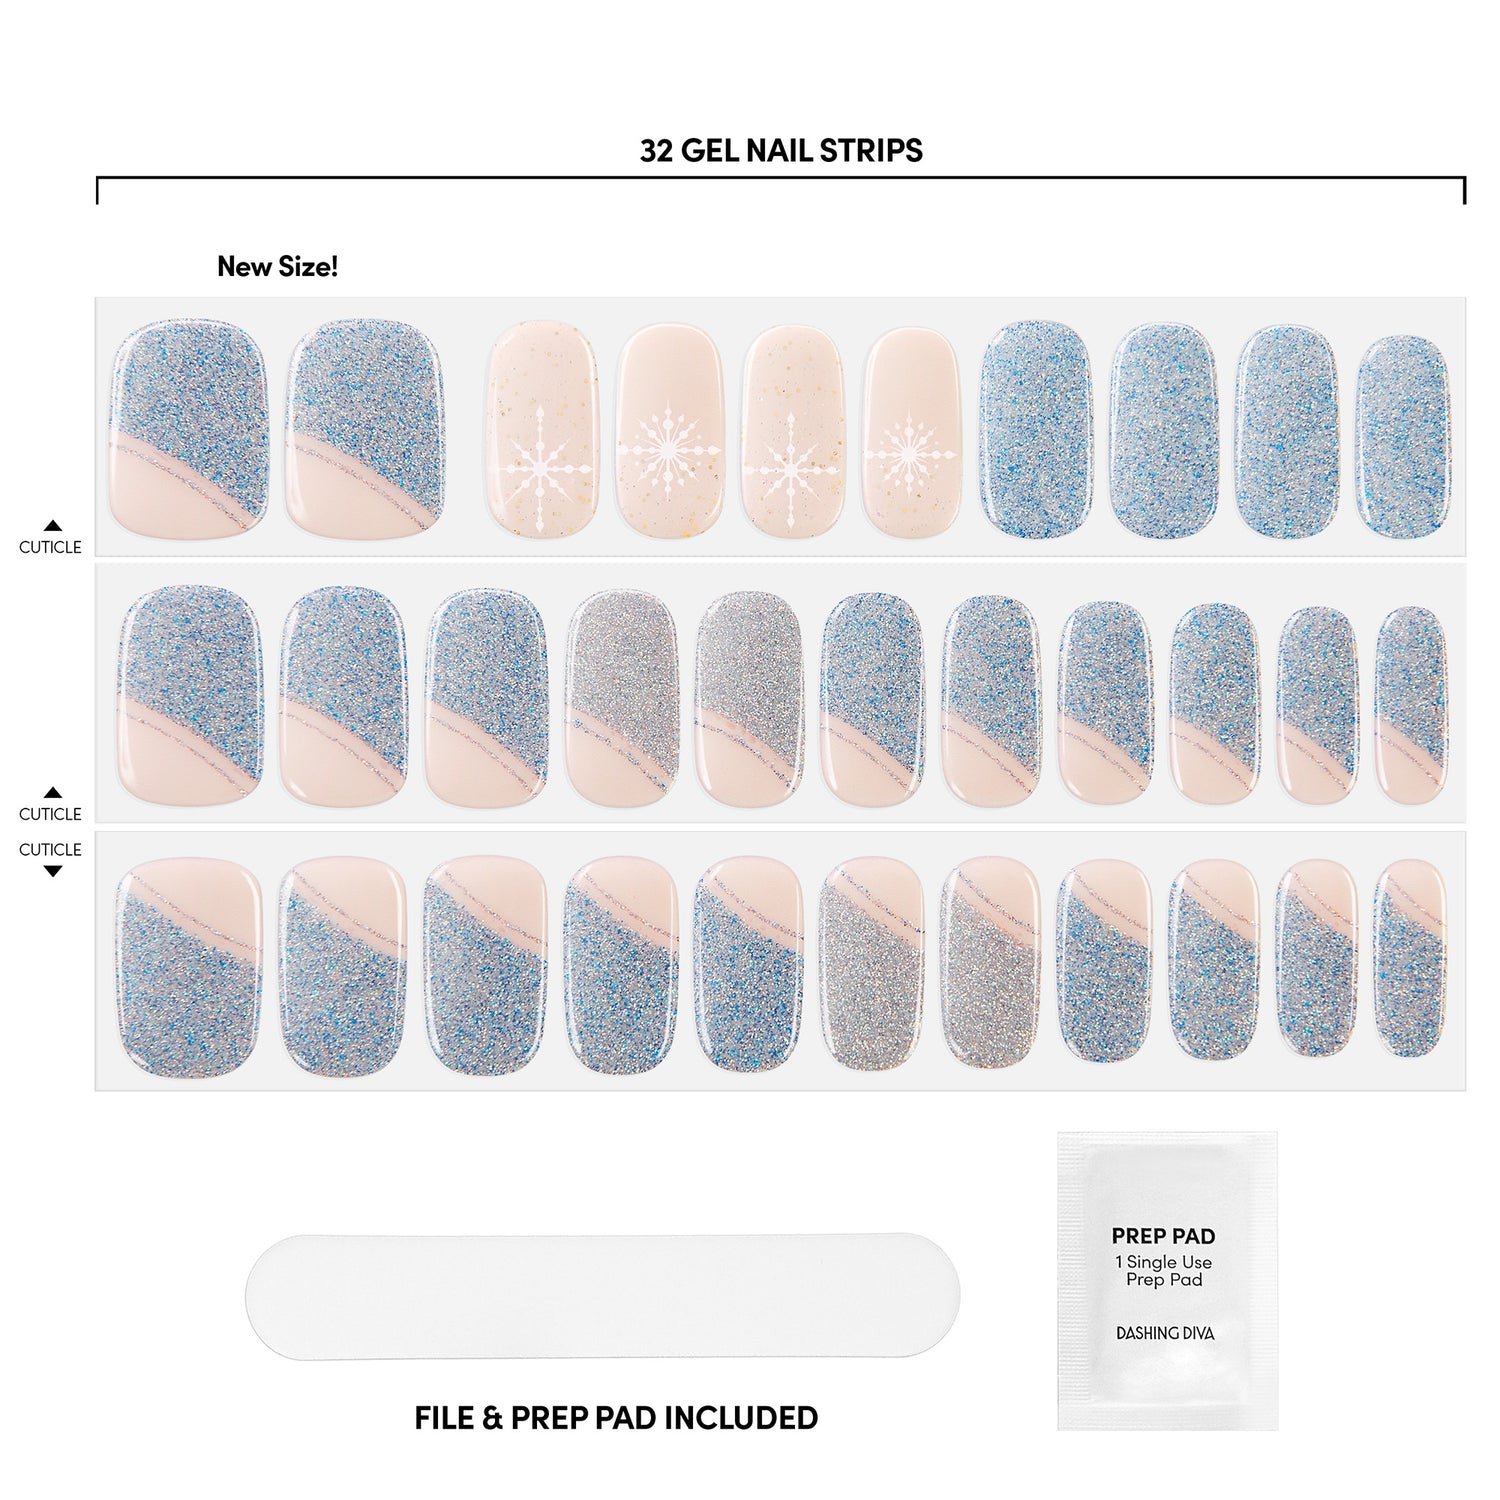 Sheer nude gel nail strips featuring asymmetrical silver & blue glittered french tips, iridescent glitter, and snowflake accents with a double gel formula for an ultra-smooth finish.